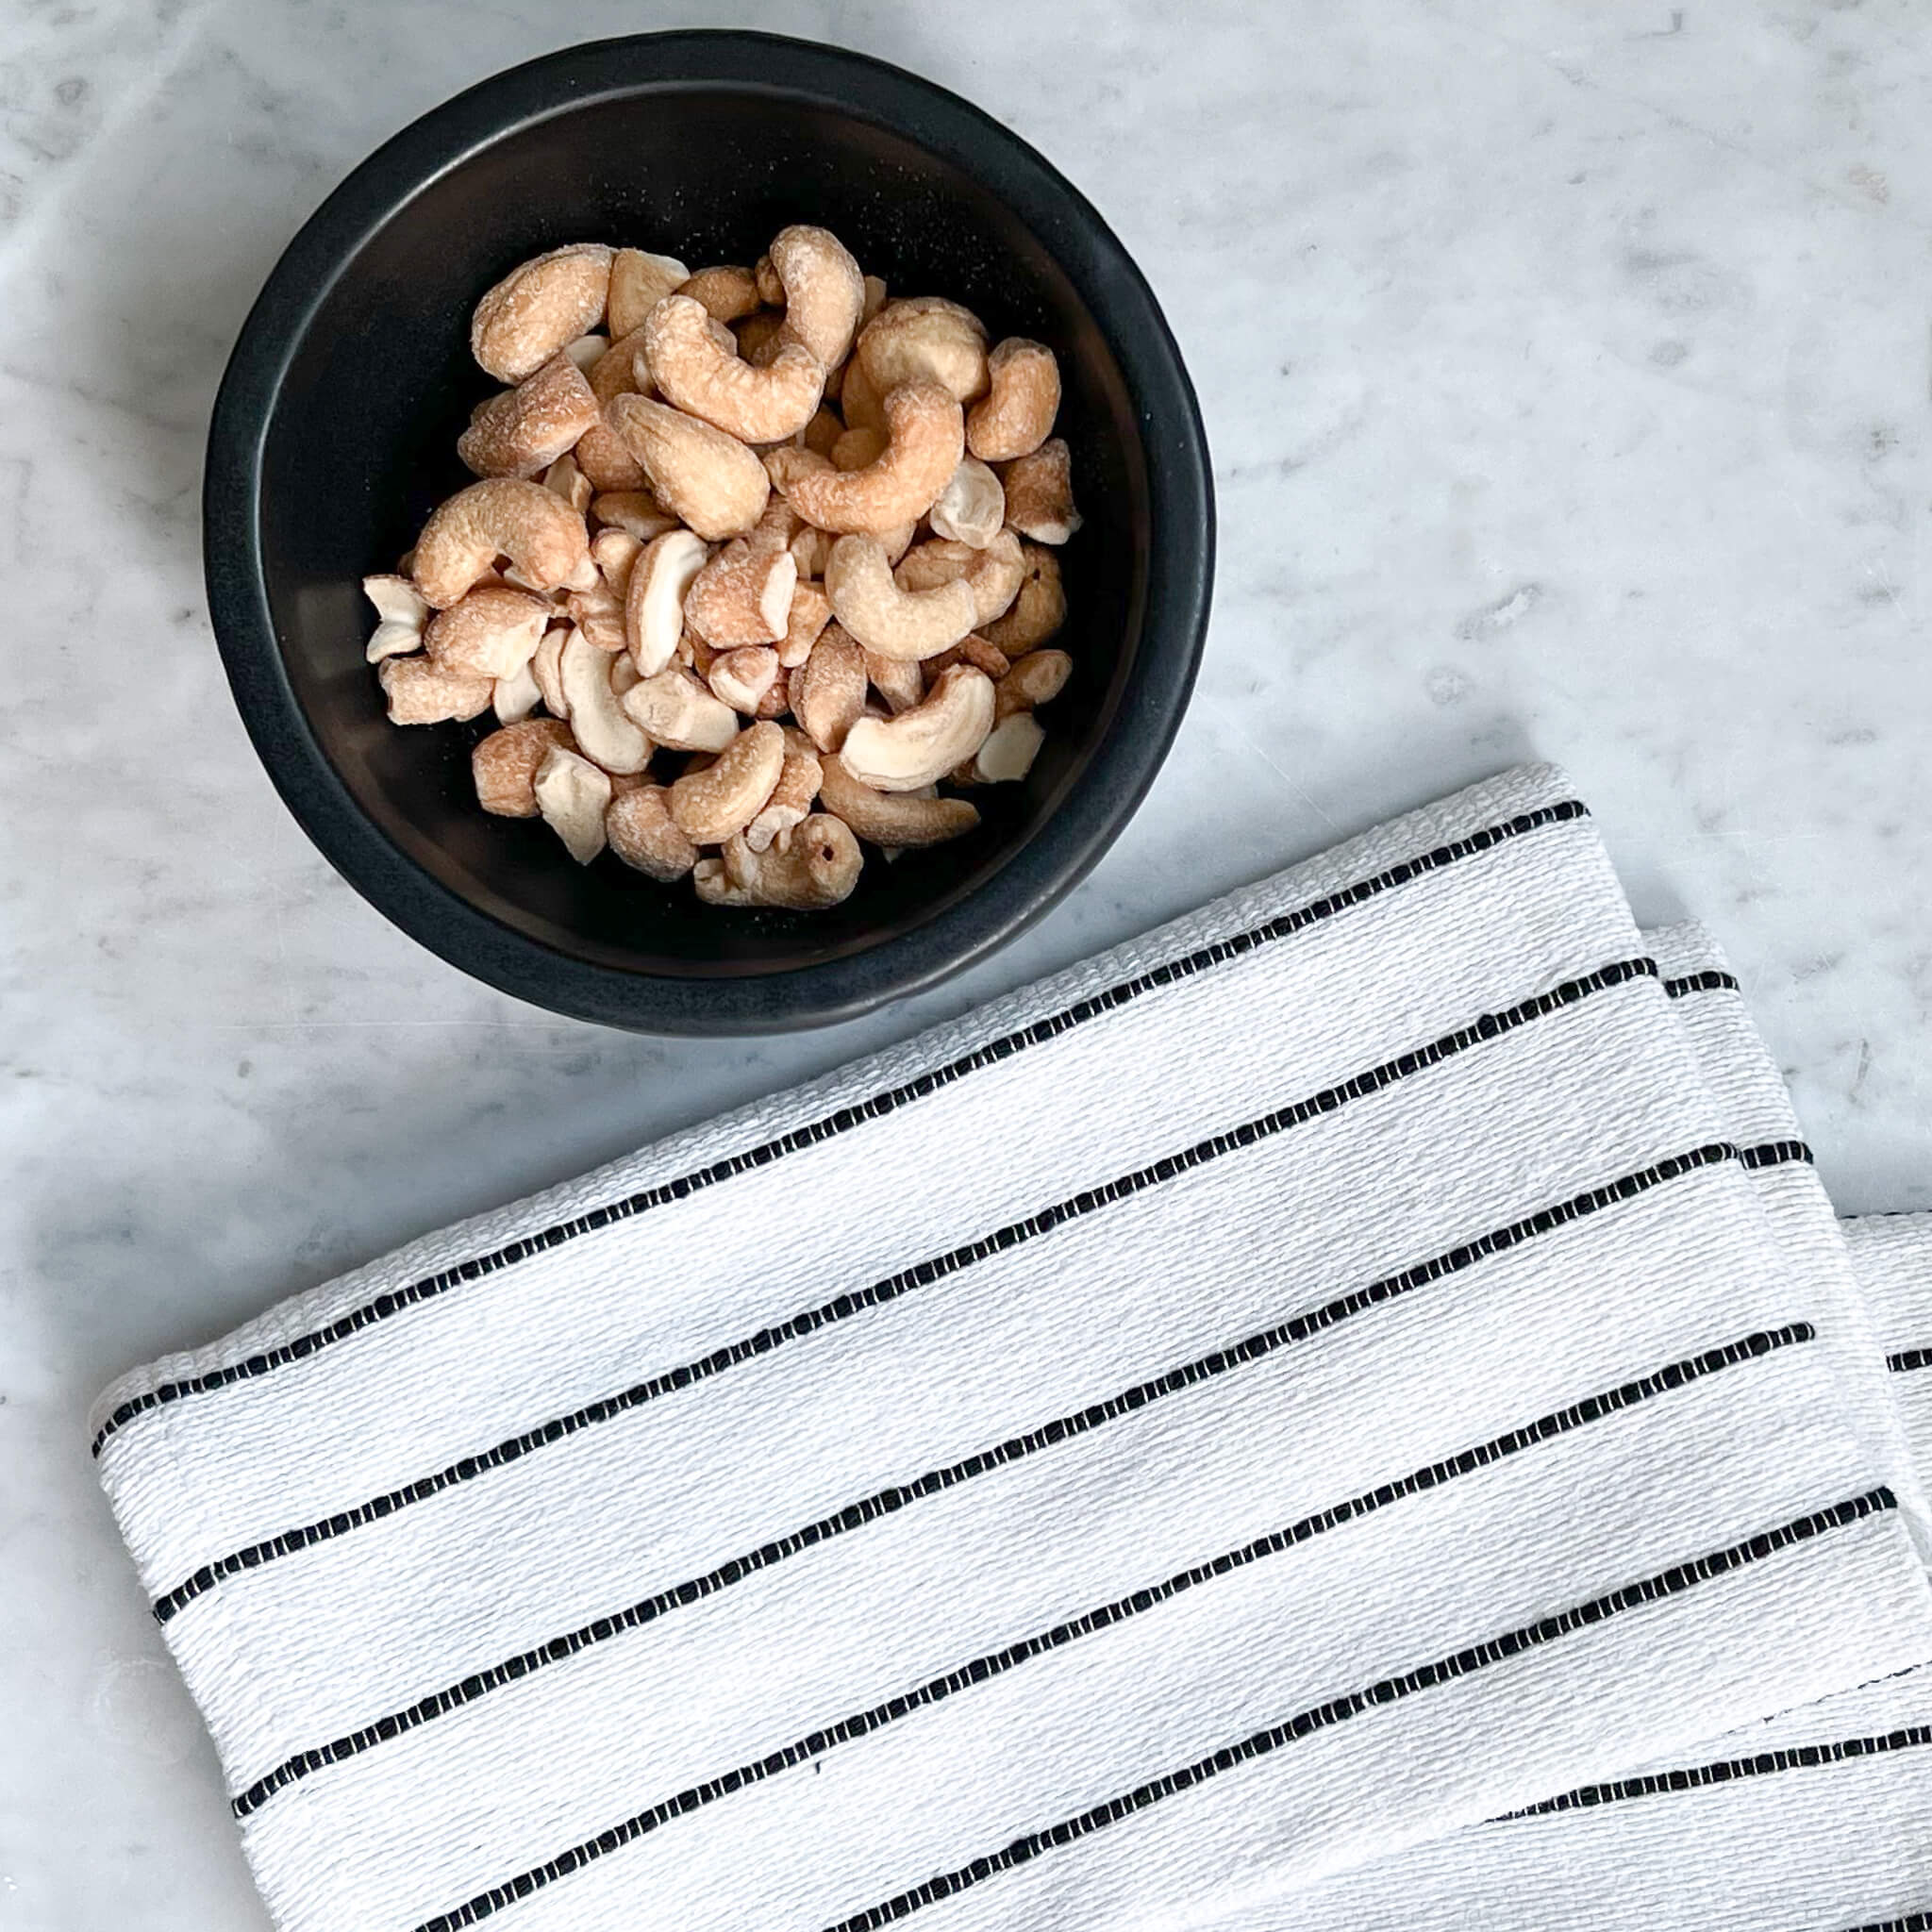 Oaxaca cotton napkins in black and white with a bowl of cashews.